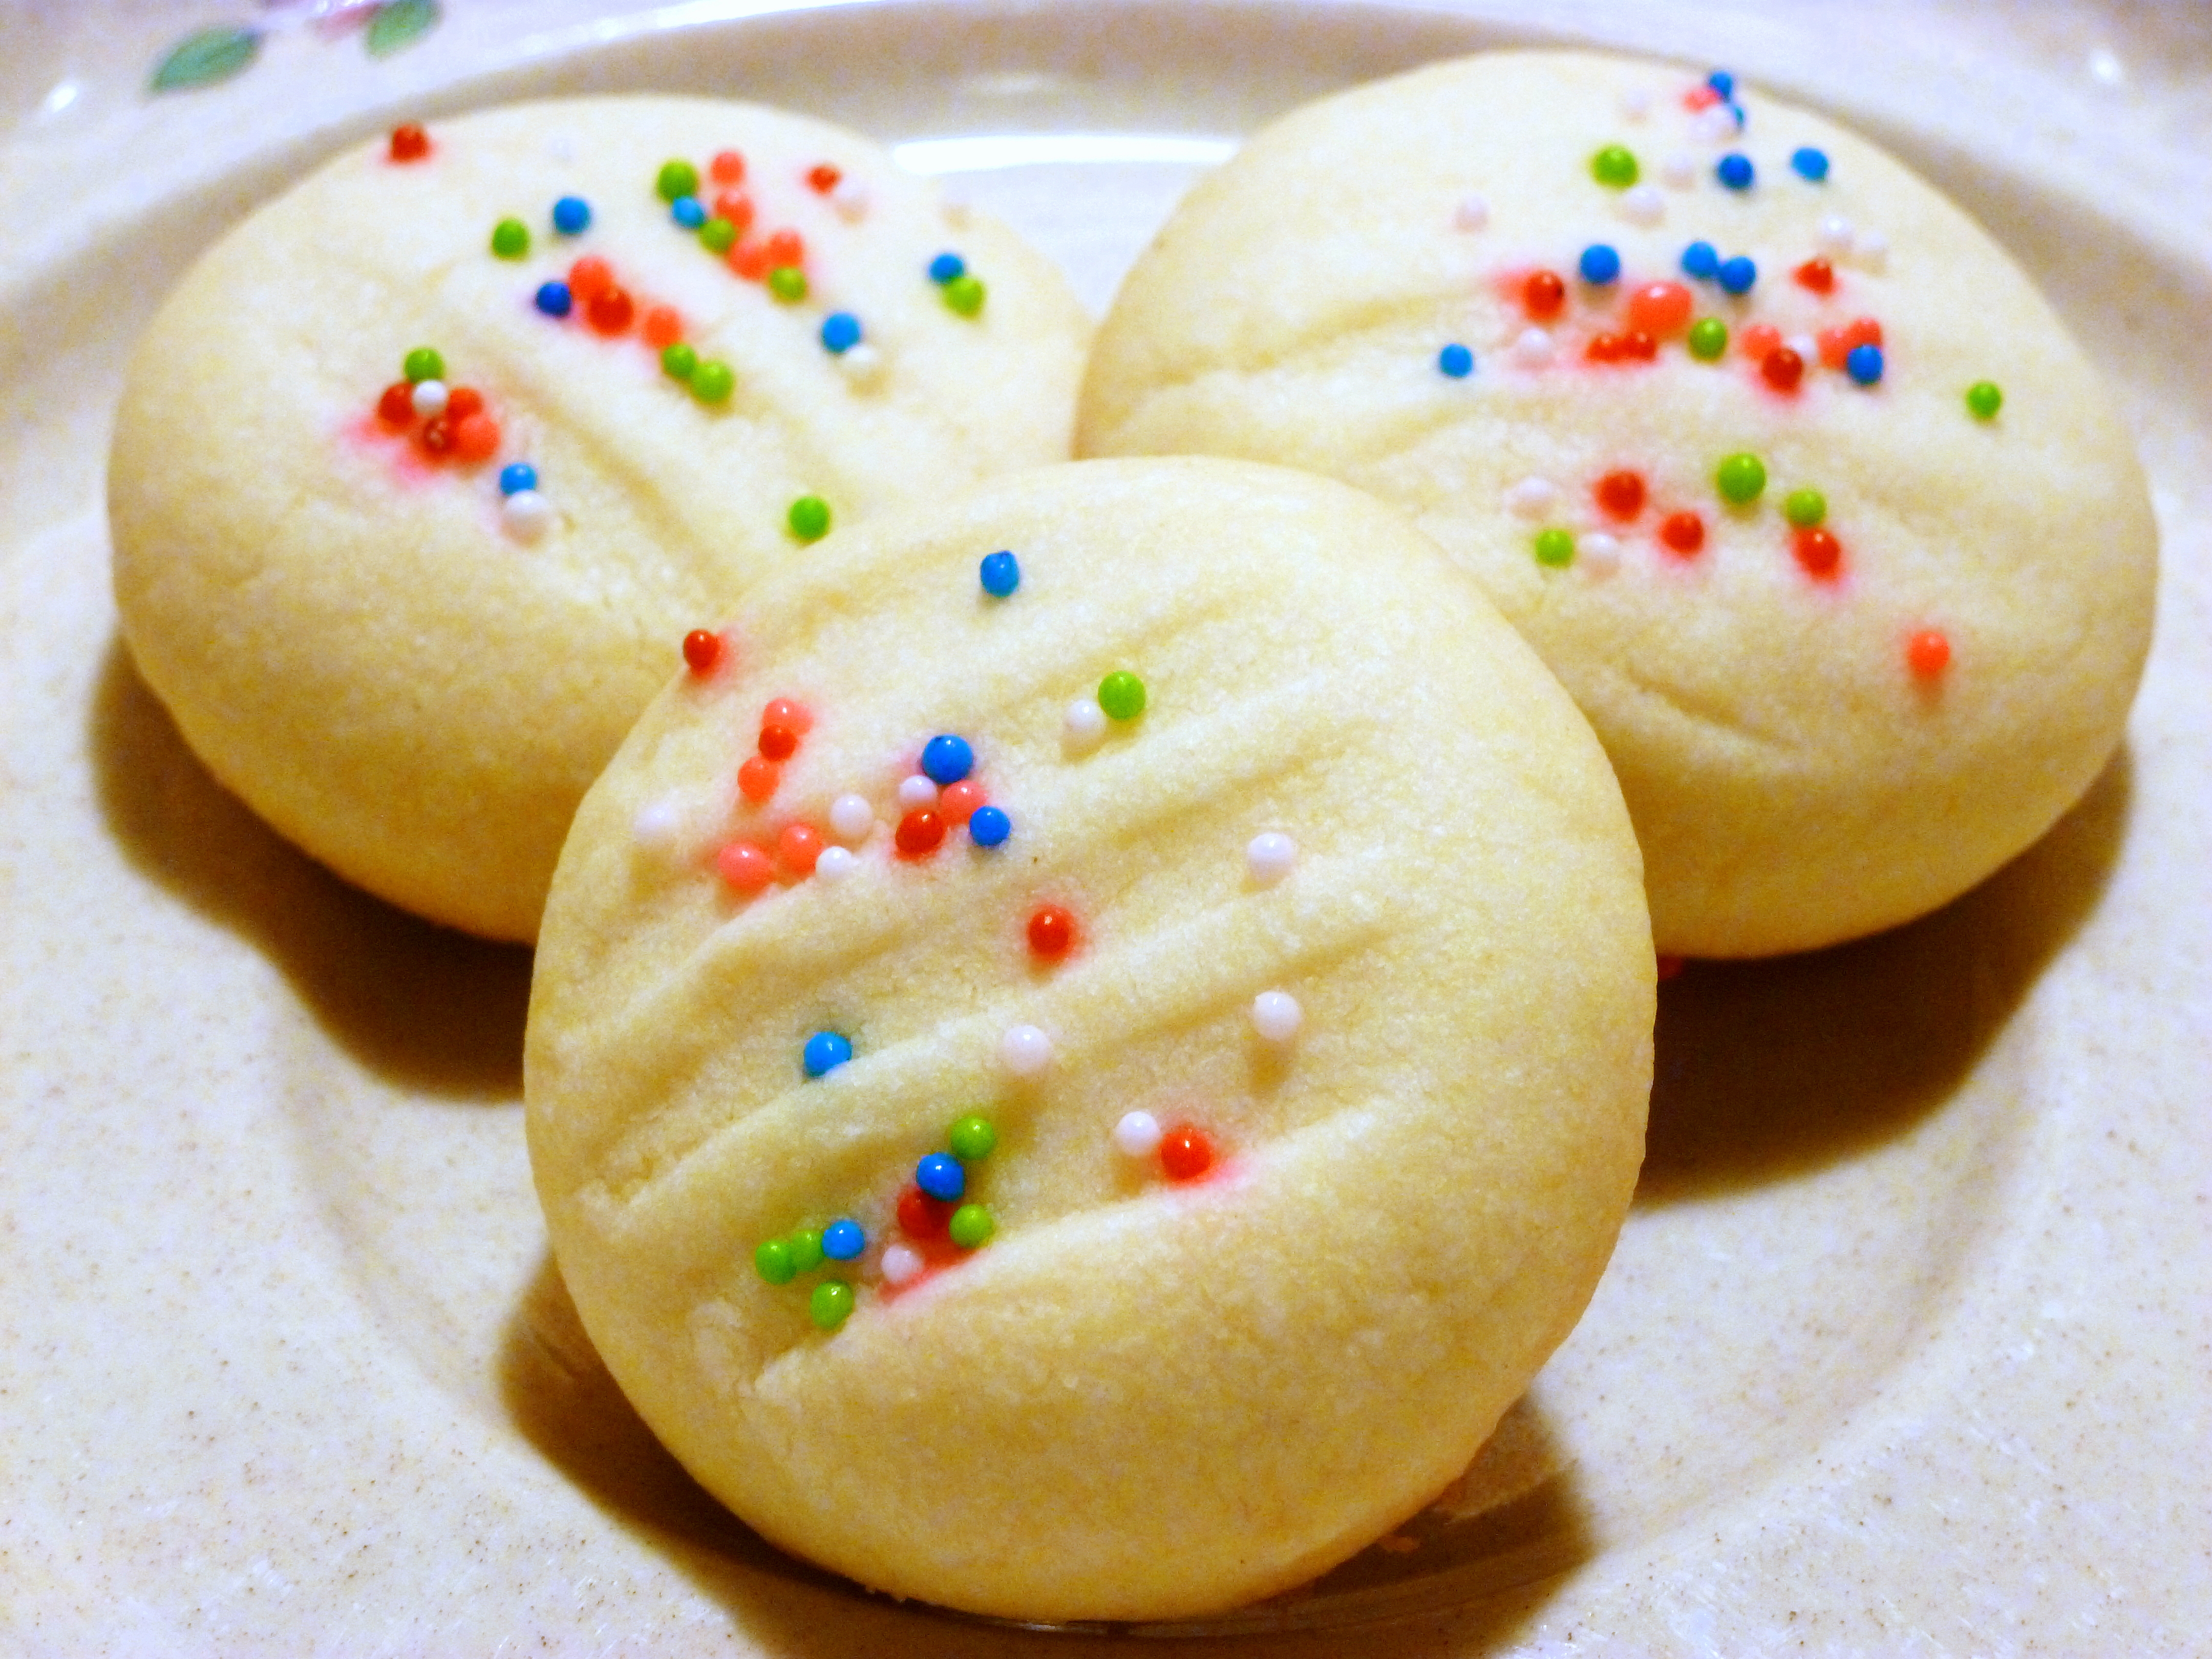 What is an easy recipe for shortbread cookies?